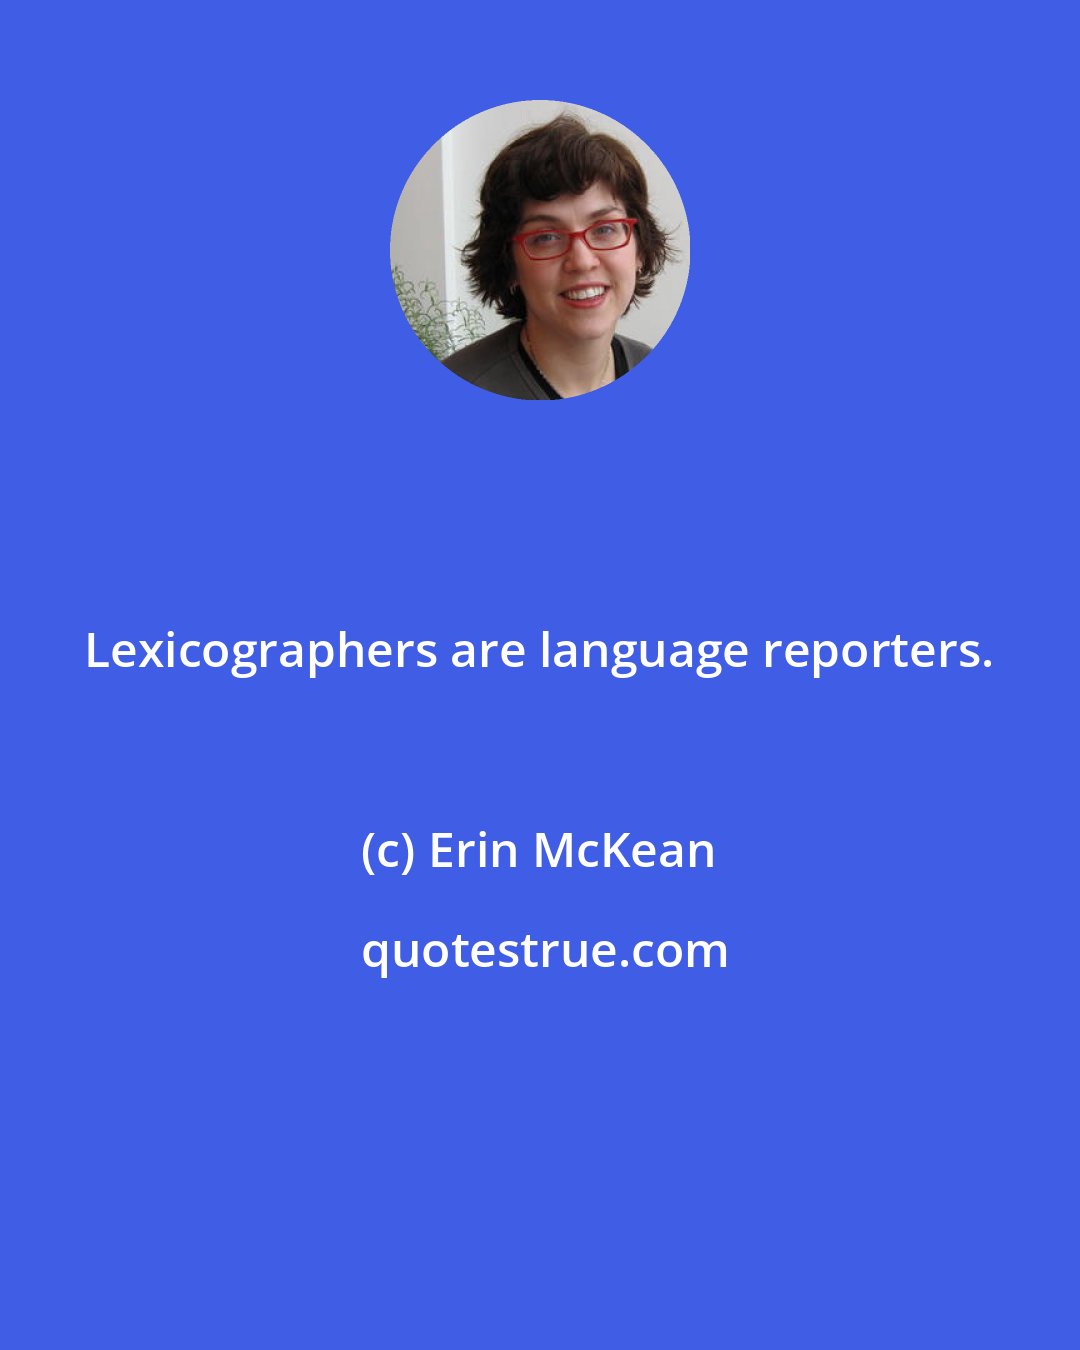 Erin McKean: Lexicographers are language reporters.